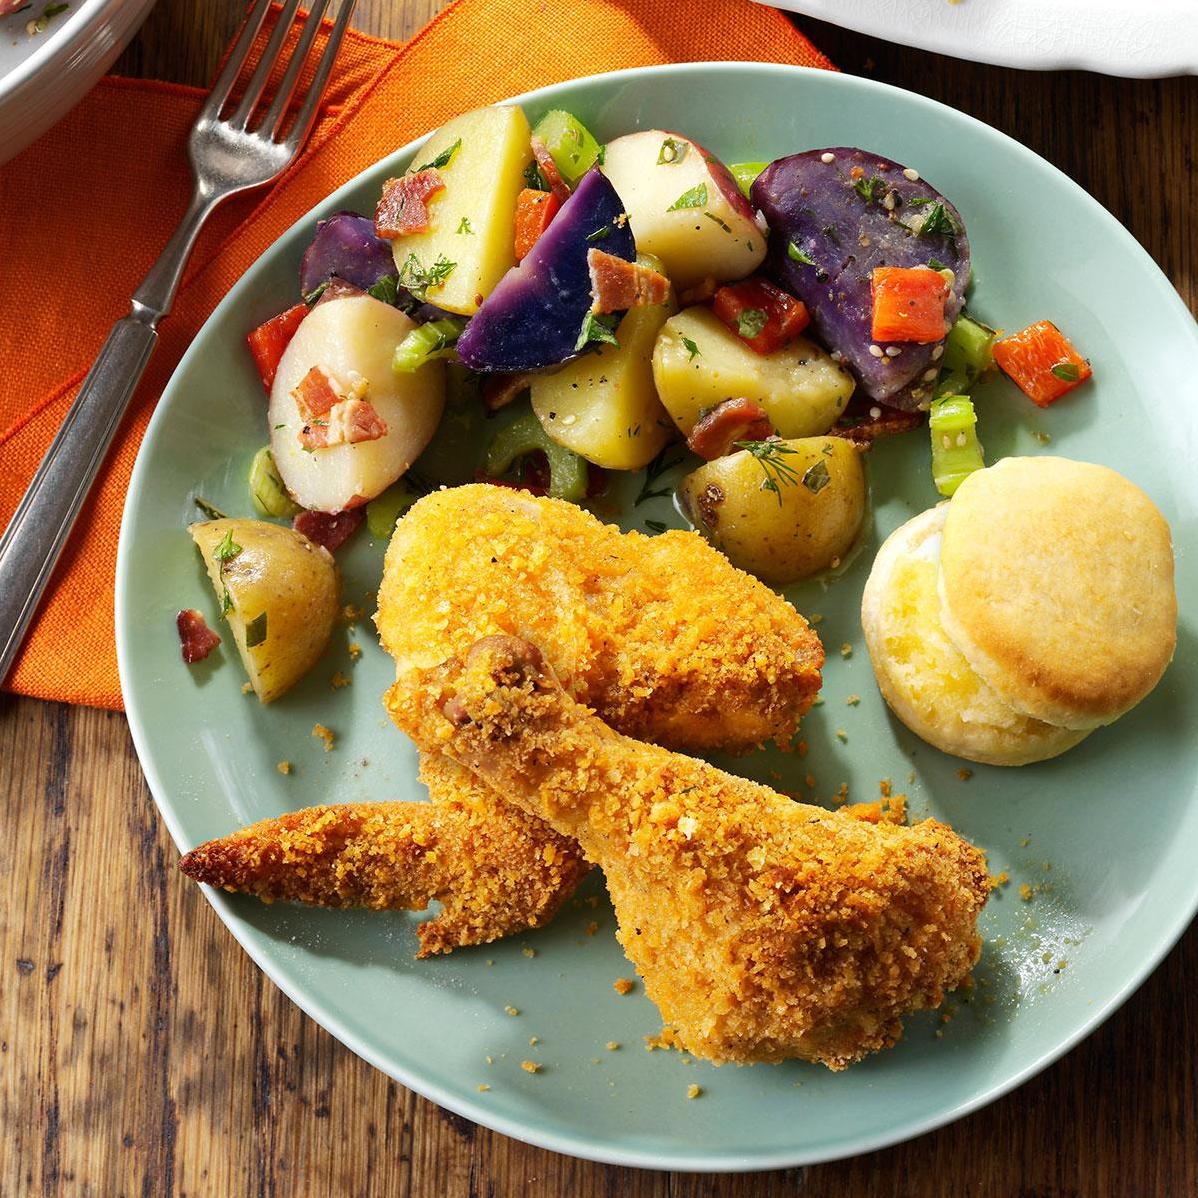  This recipe has all the flavors of southern-style fried chicken, with a healthier twist